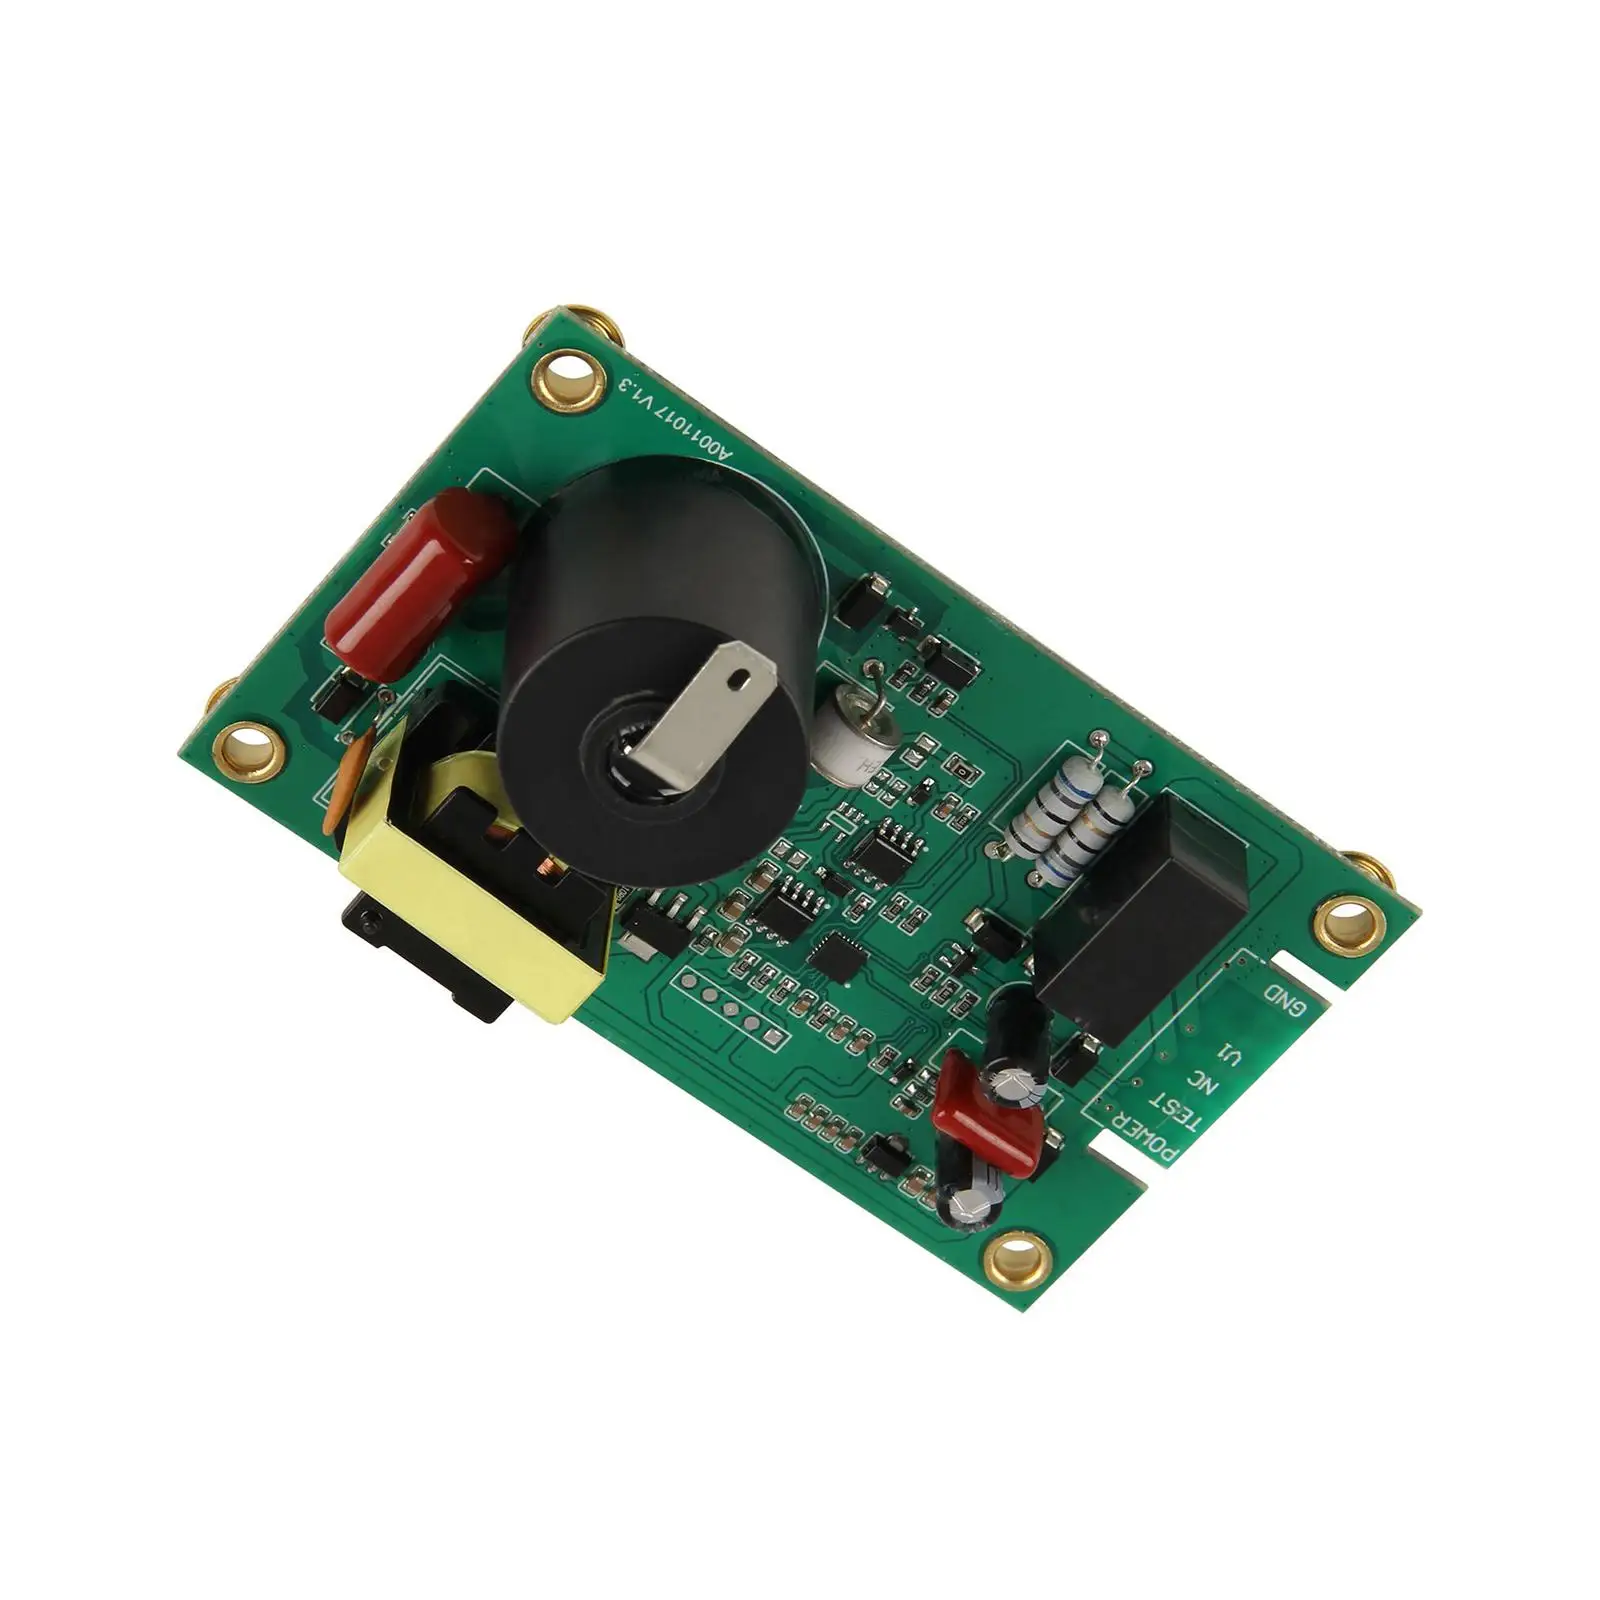 12V Module Board Replacement Accessory Repair Part 80-8531 35-525900-113 20835 for SW10 SW6dem SW6DM SW6del Professional